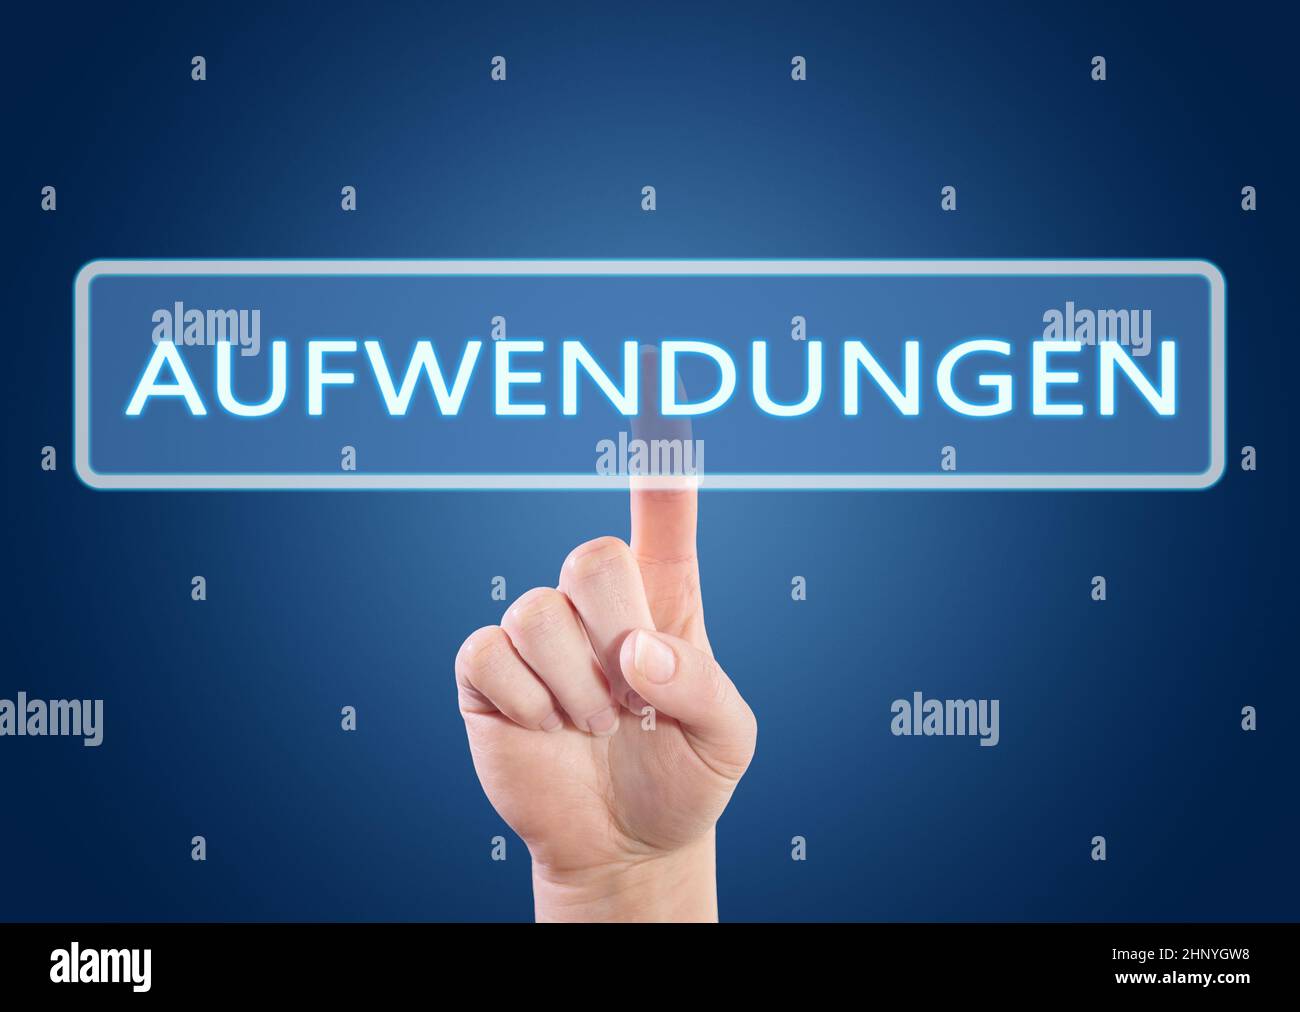 Aufwendungen - german word for expenses or outlay or operating costs - Hand button on interface with blue background. Stock Photo